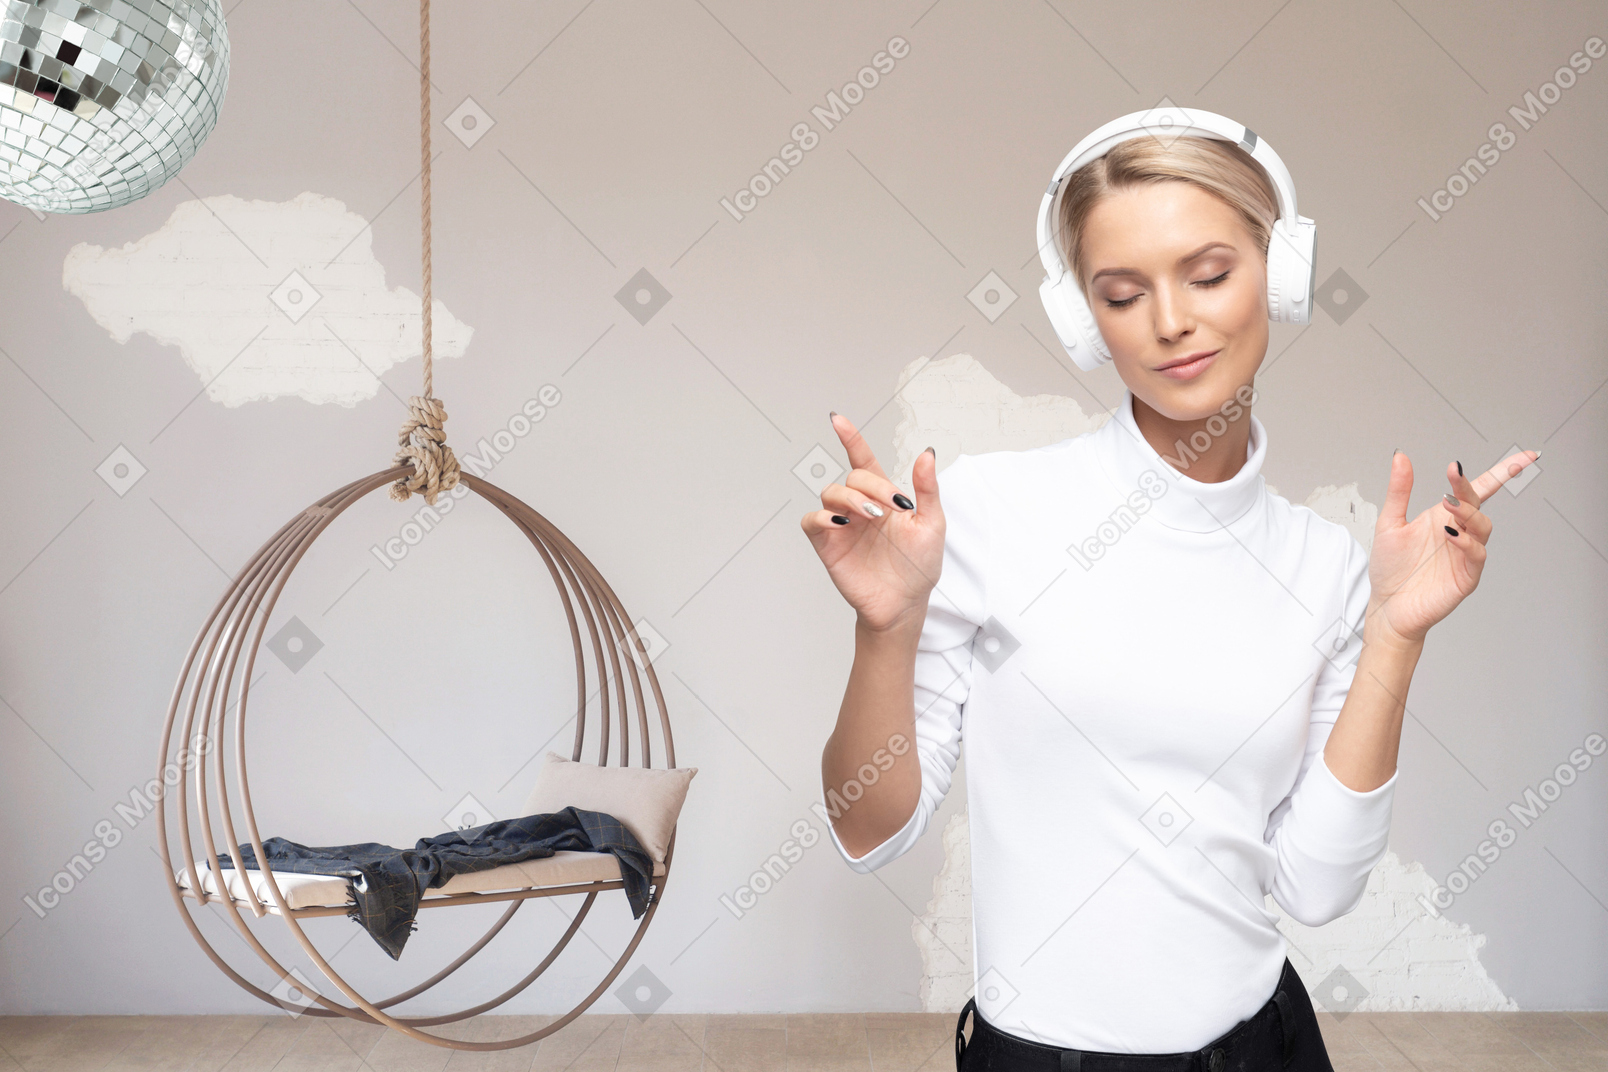 Woman with headphones standing in front of hanging chair